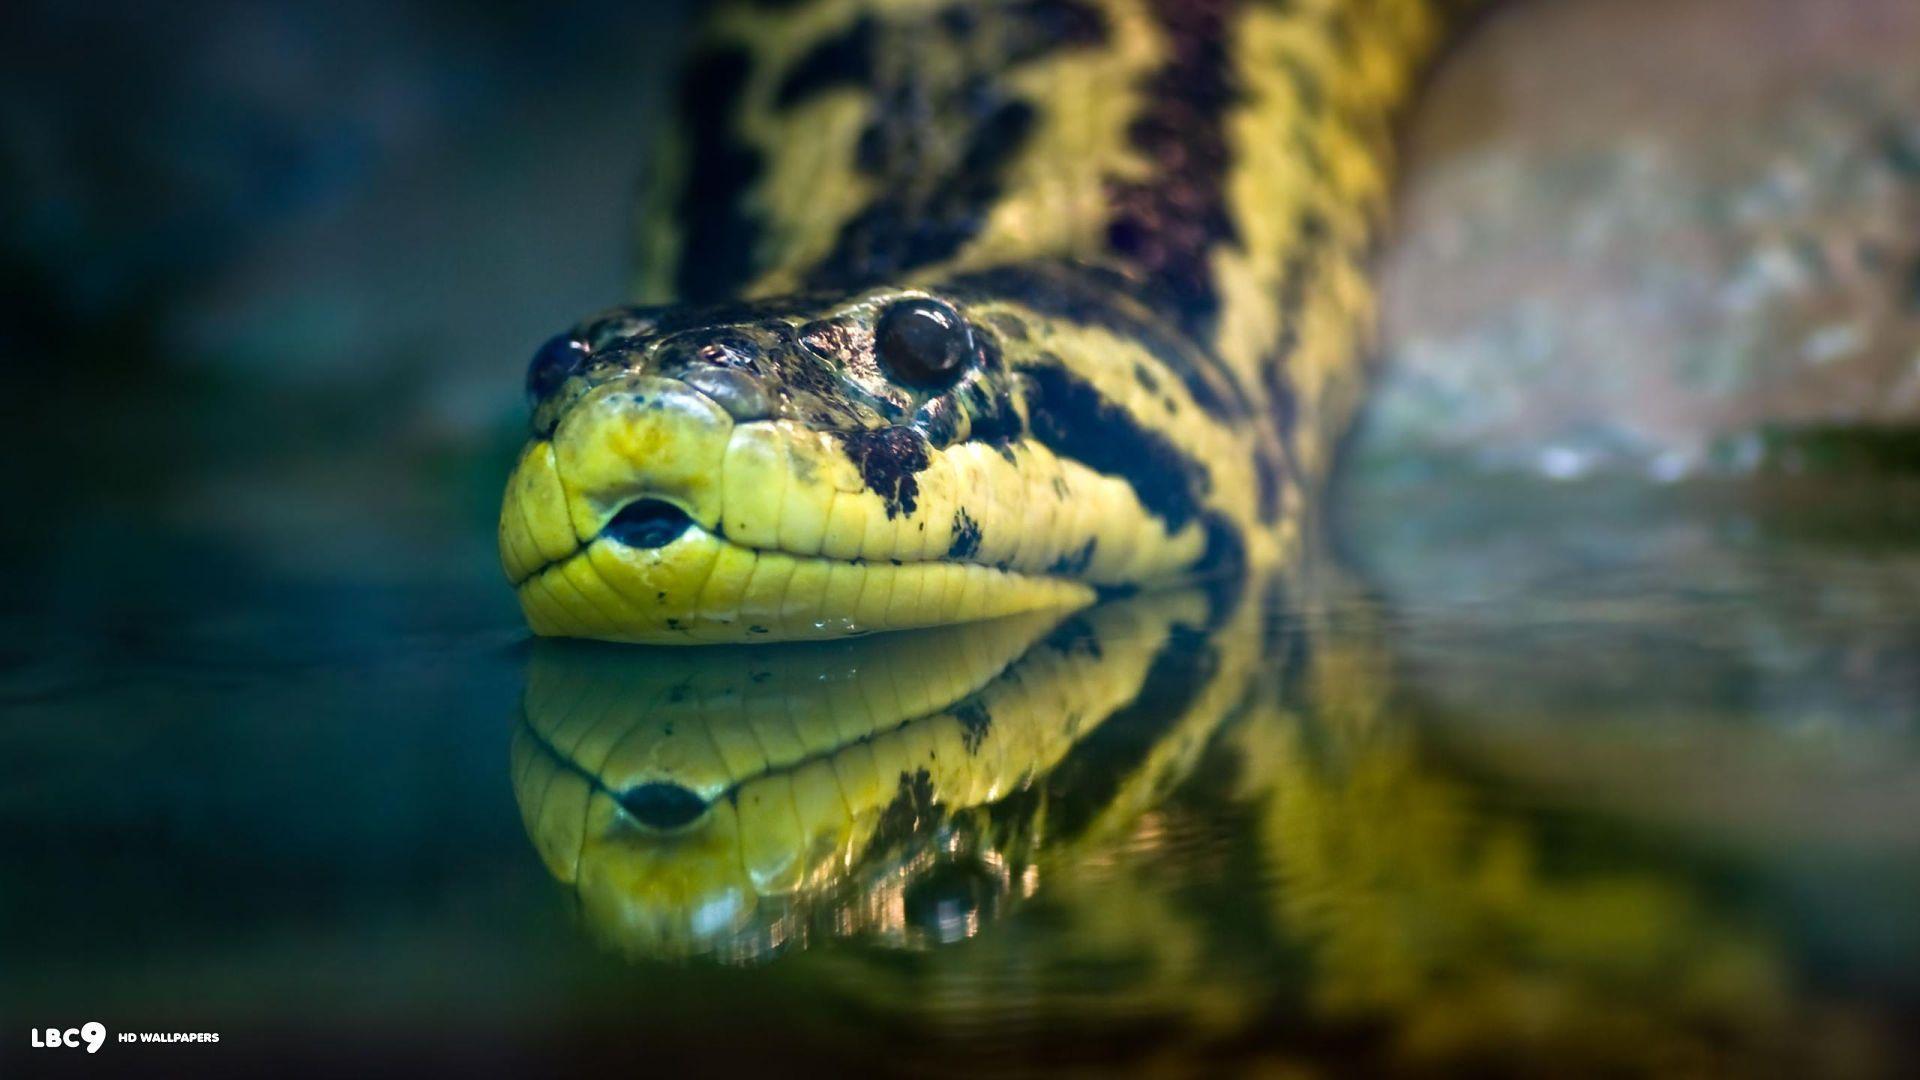 A selection of 8 Image of Anaconda in HD quality